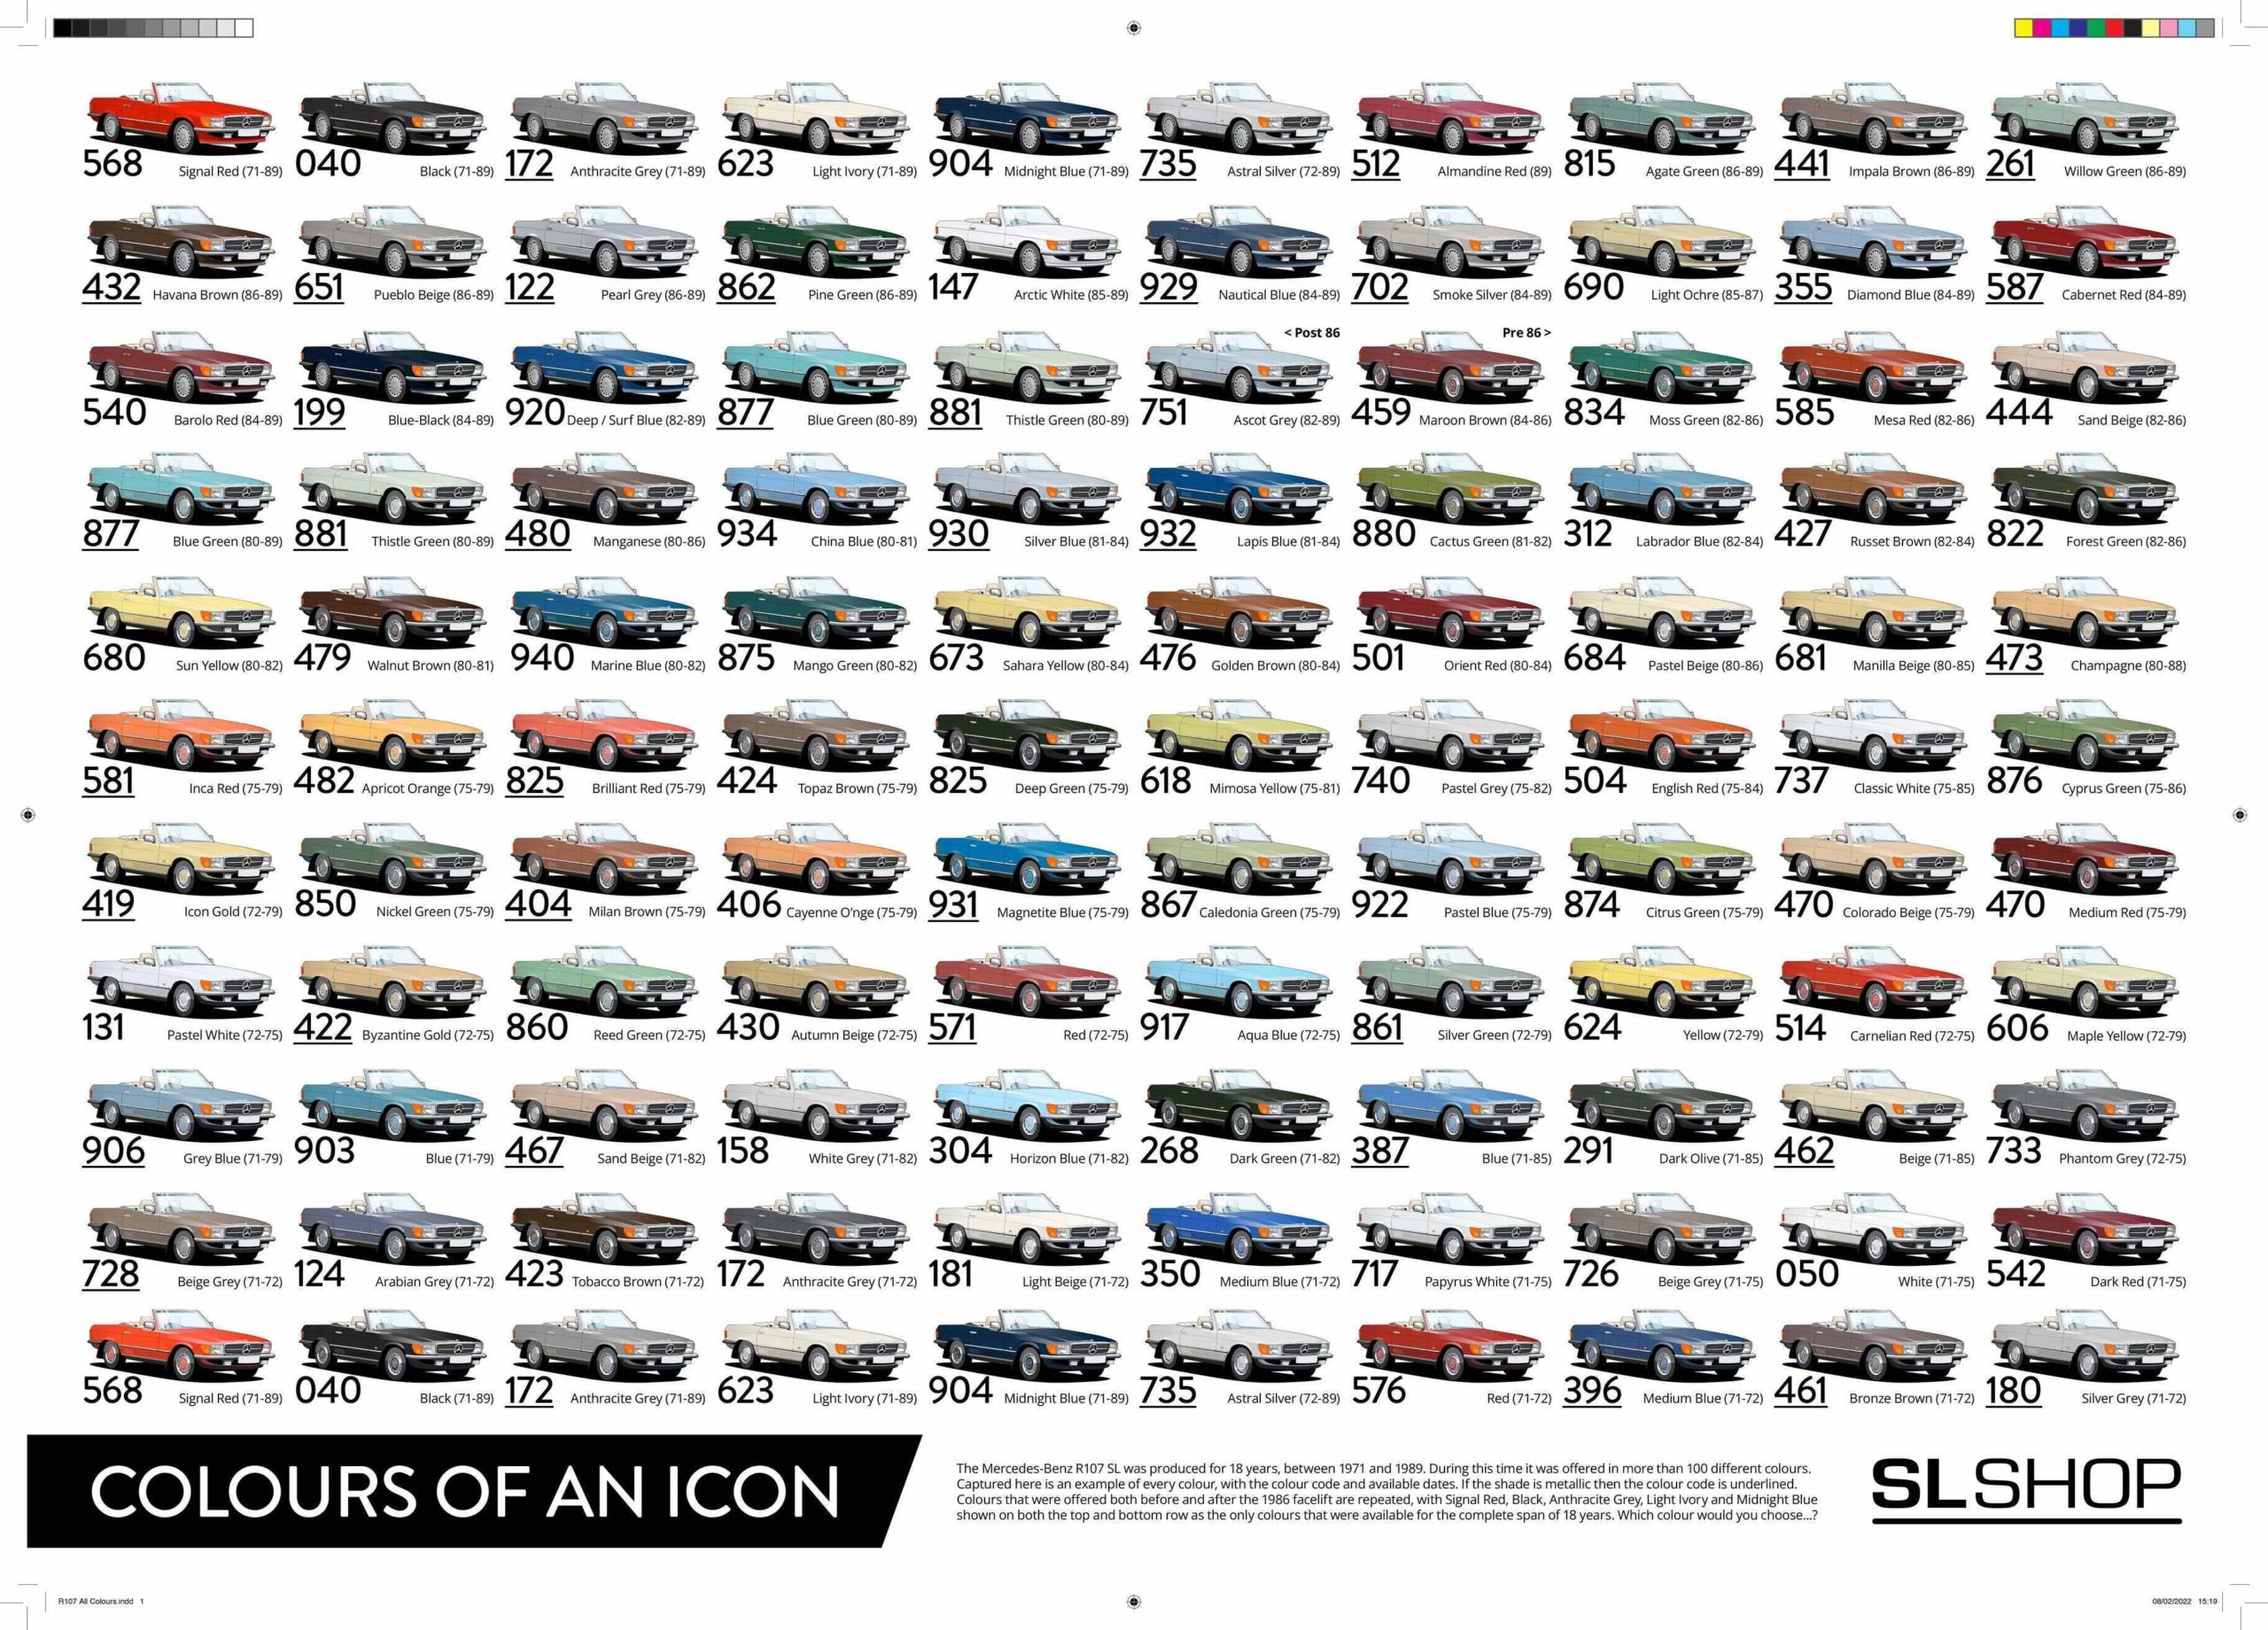 The W113 Colours of Elegance poster by SLSHOP